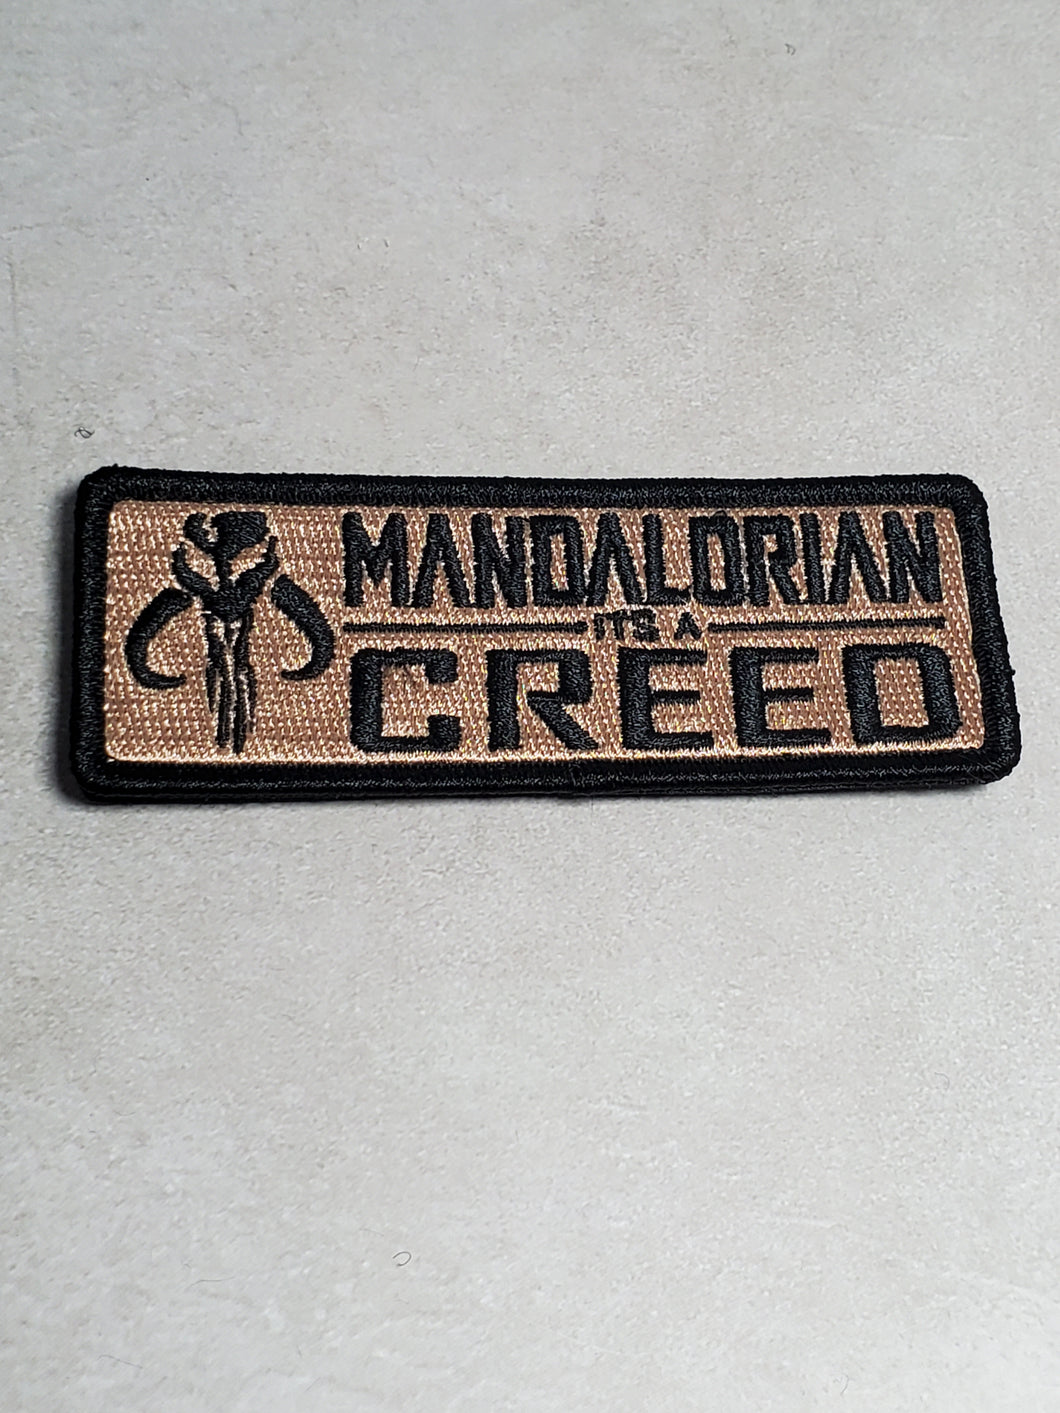 Mandalorian It's a Creed Embroidered Morale Patch